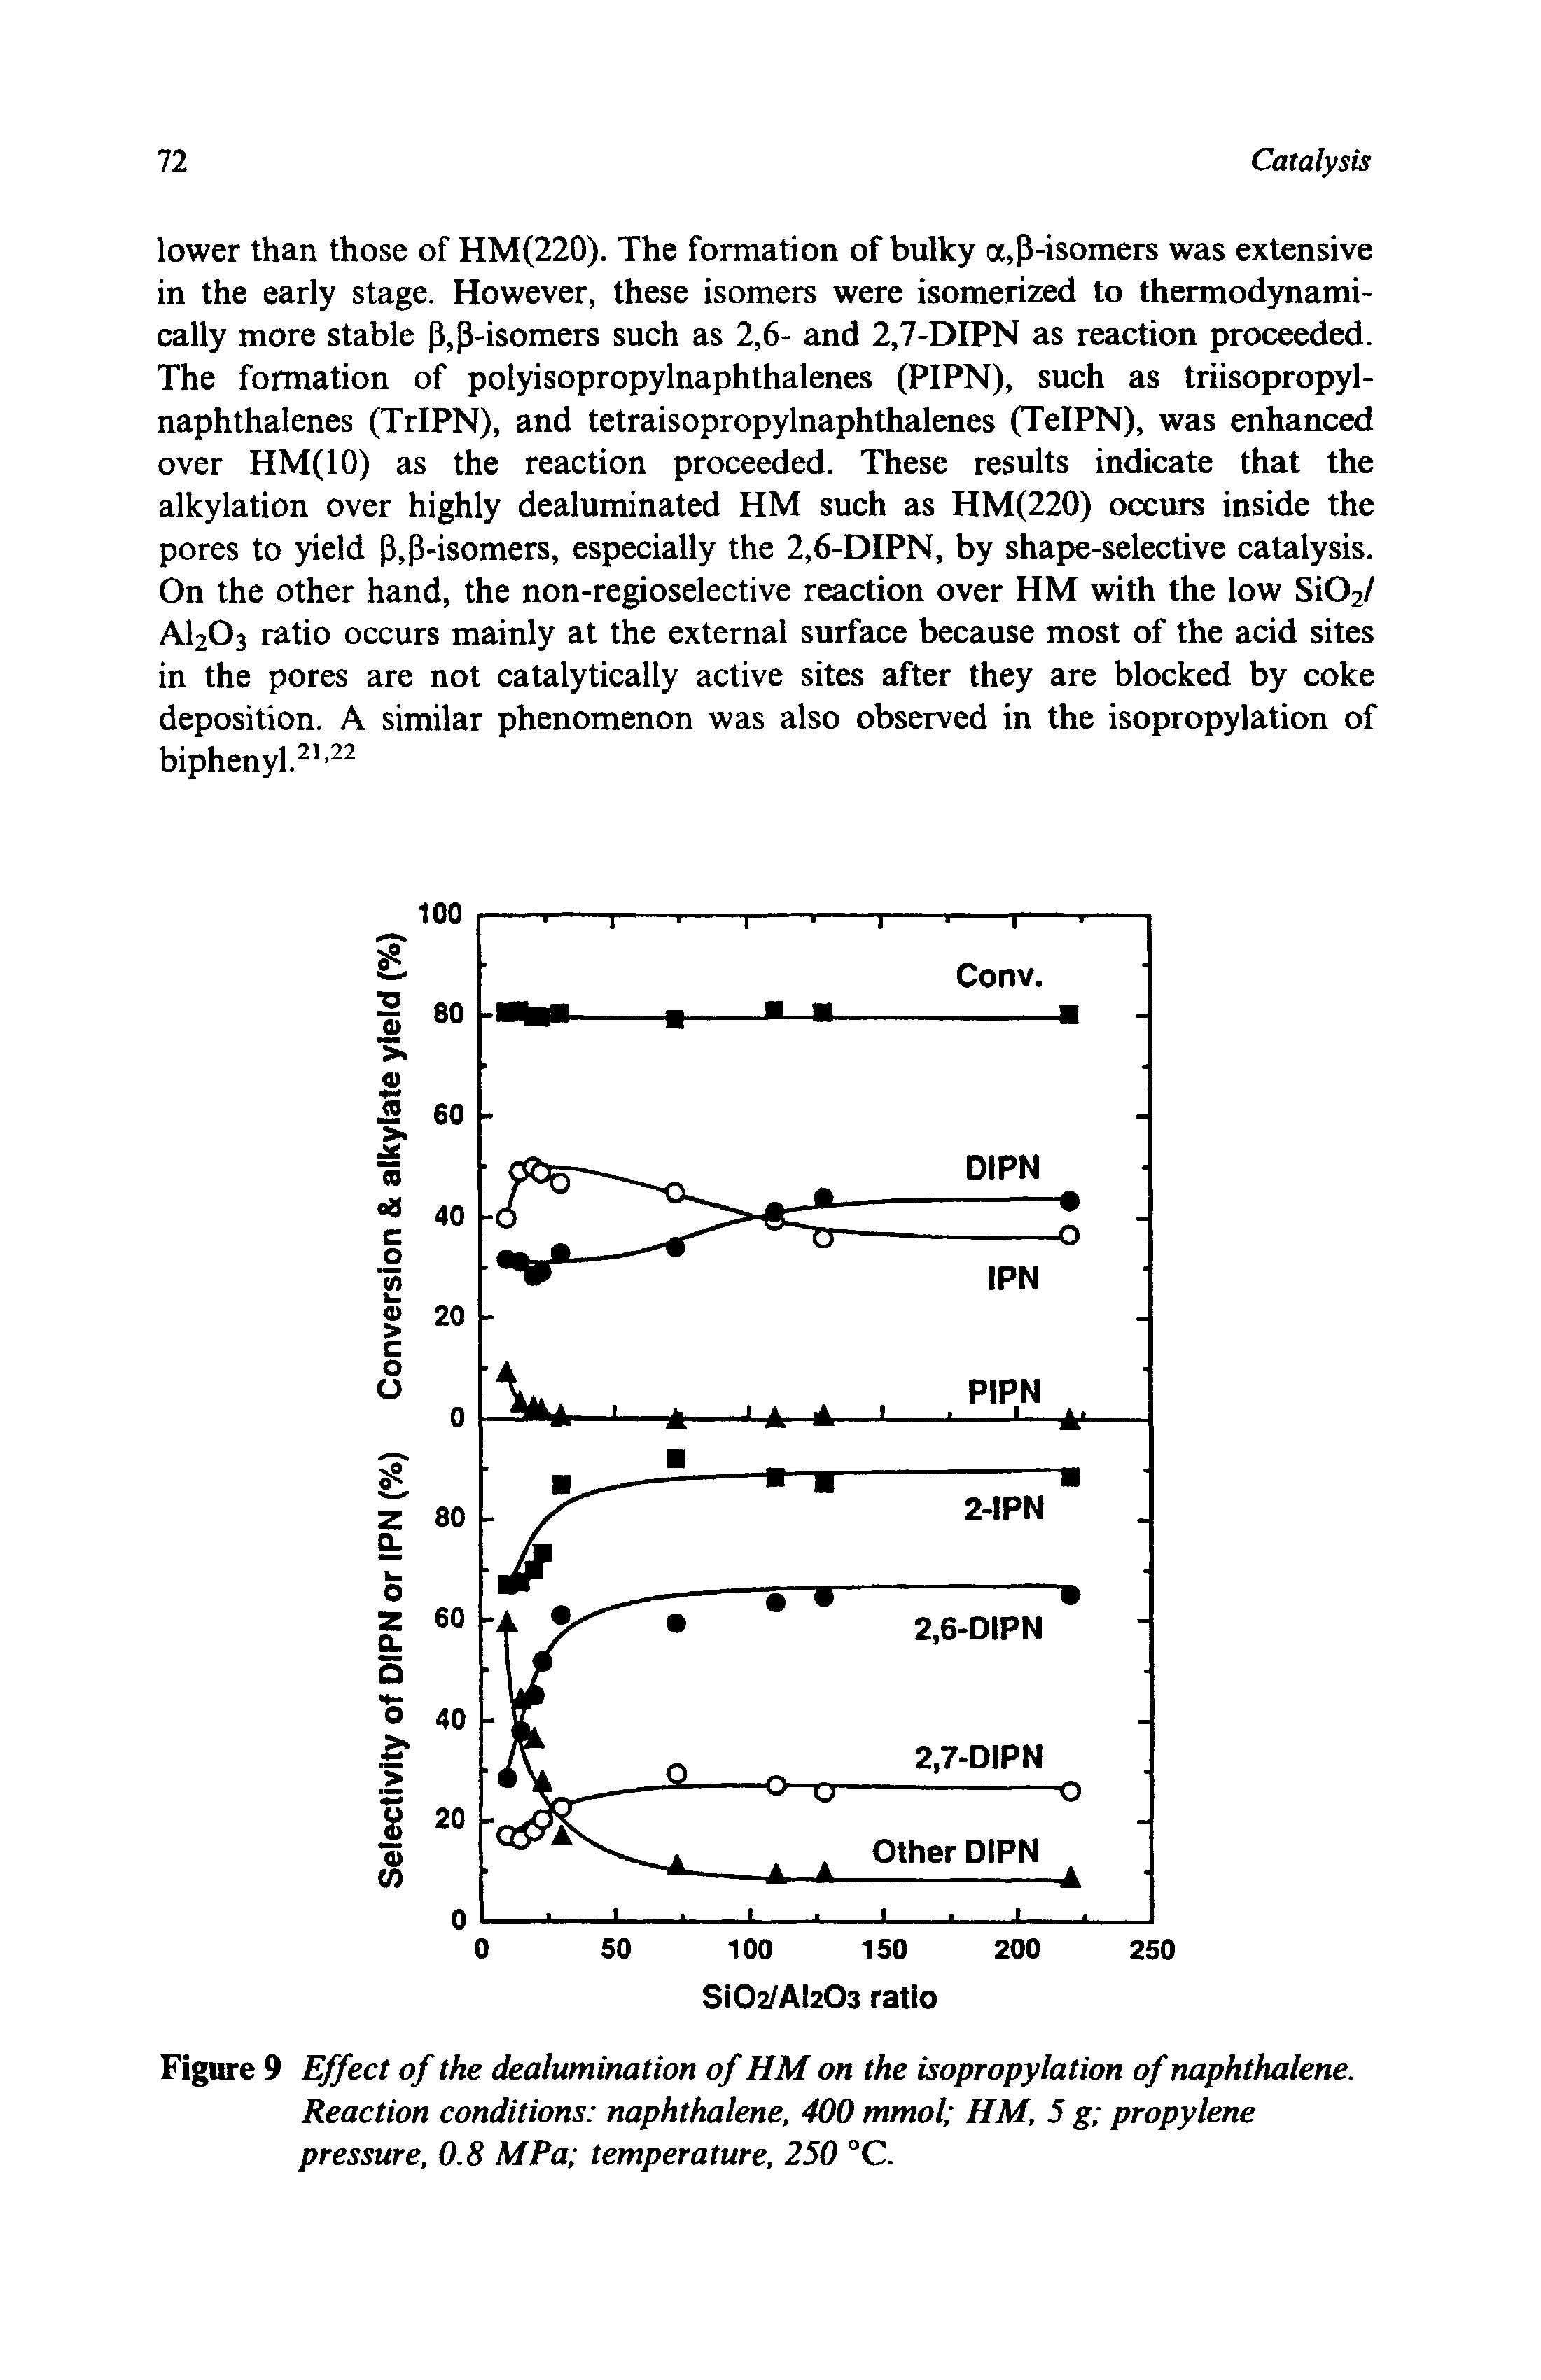 Figure 9 Effect of the dealumination of HM on the isopropylation of naphthalene. Reaction conditions naphthalene, 400 mmol HM, 5 g propylene pressure, 0.8 MPa temperature, 250 °C.